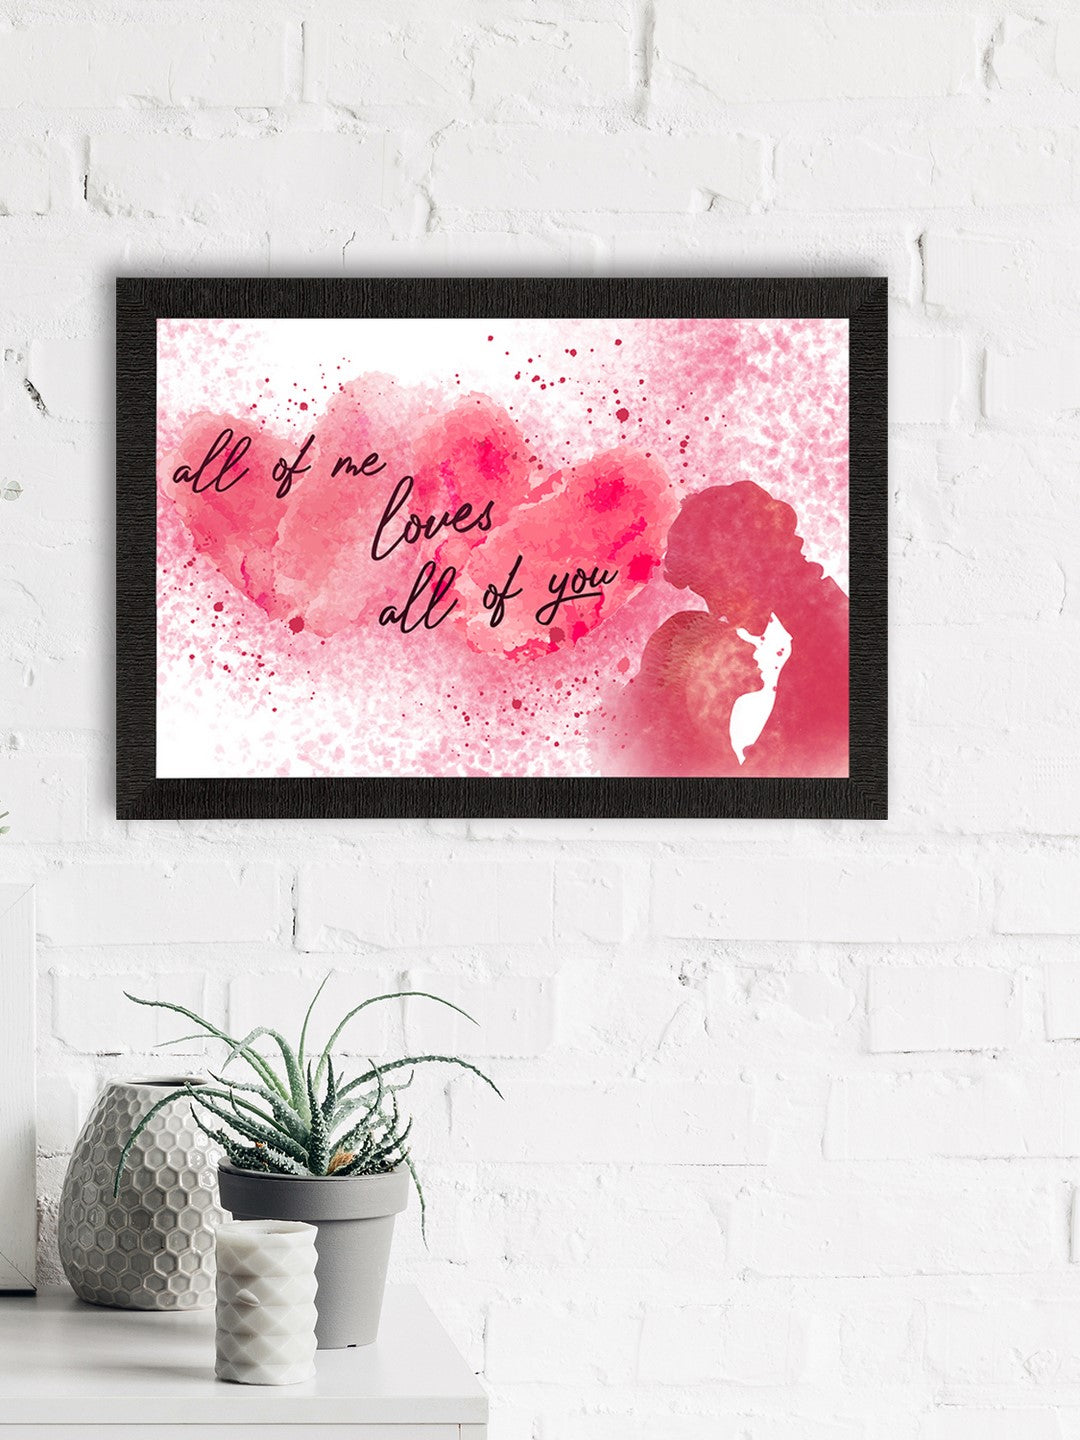 "All of me loves All of you" Love Theme Quote Satin Matt Texture UV Art Painting 1